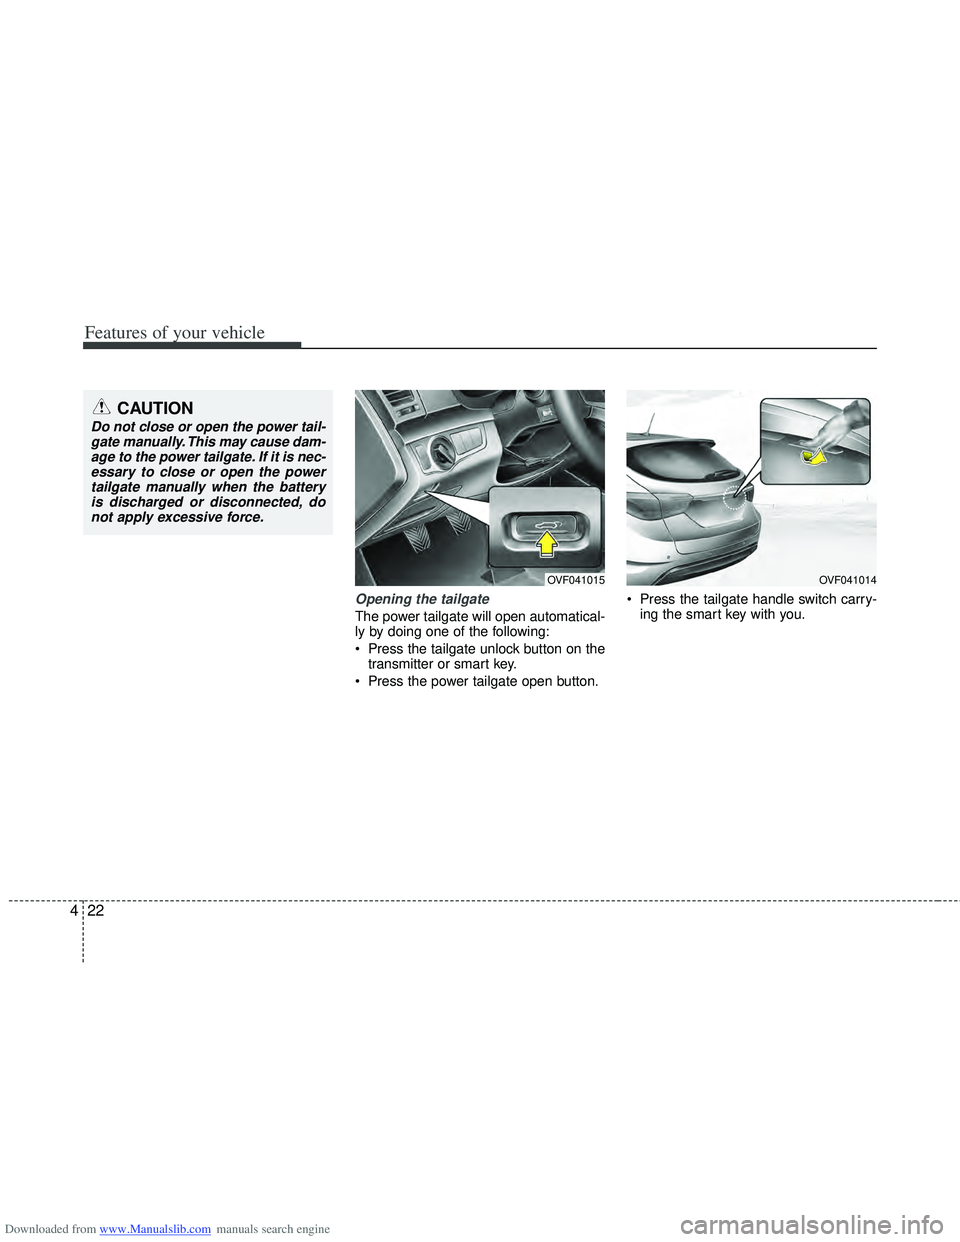 HYUNDAI I40 2018  Owners Manual Downloaded from www.Manualslib.com manuals search engine Features of your vehicle
22
4
Opening the tailgate
The power tailgate will open automatical-
ly by doing one of the following:
 Press the tailg